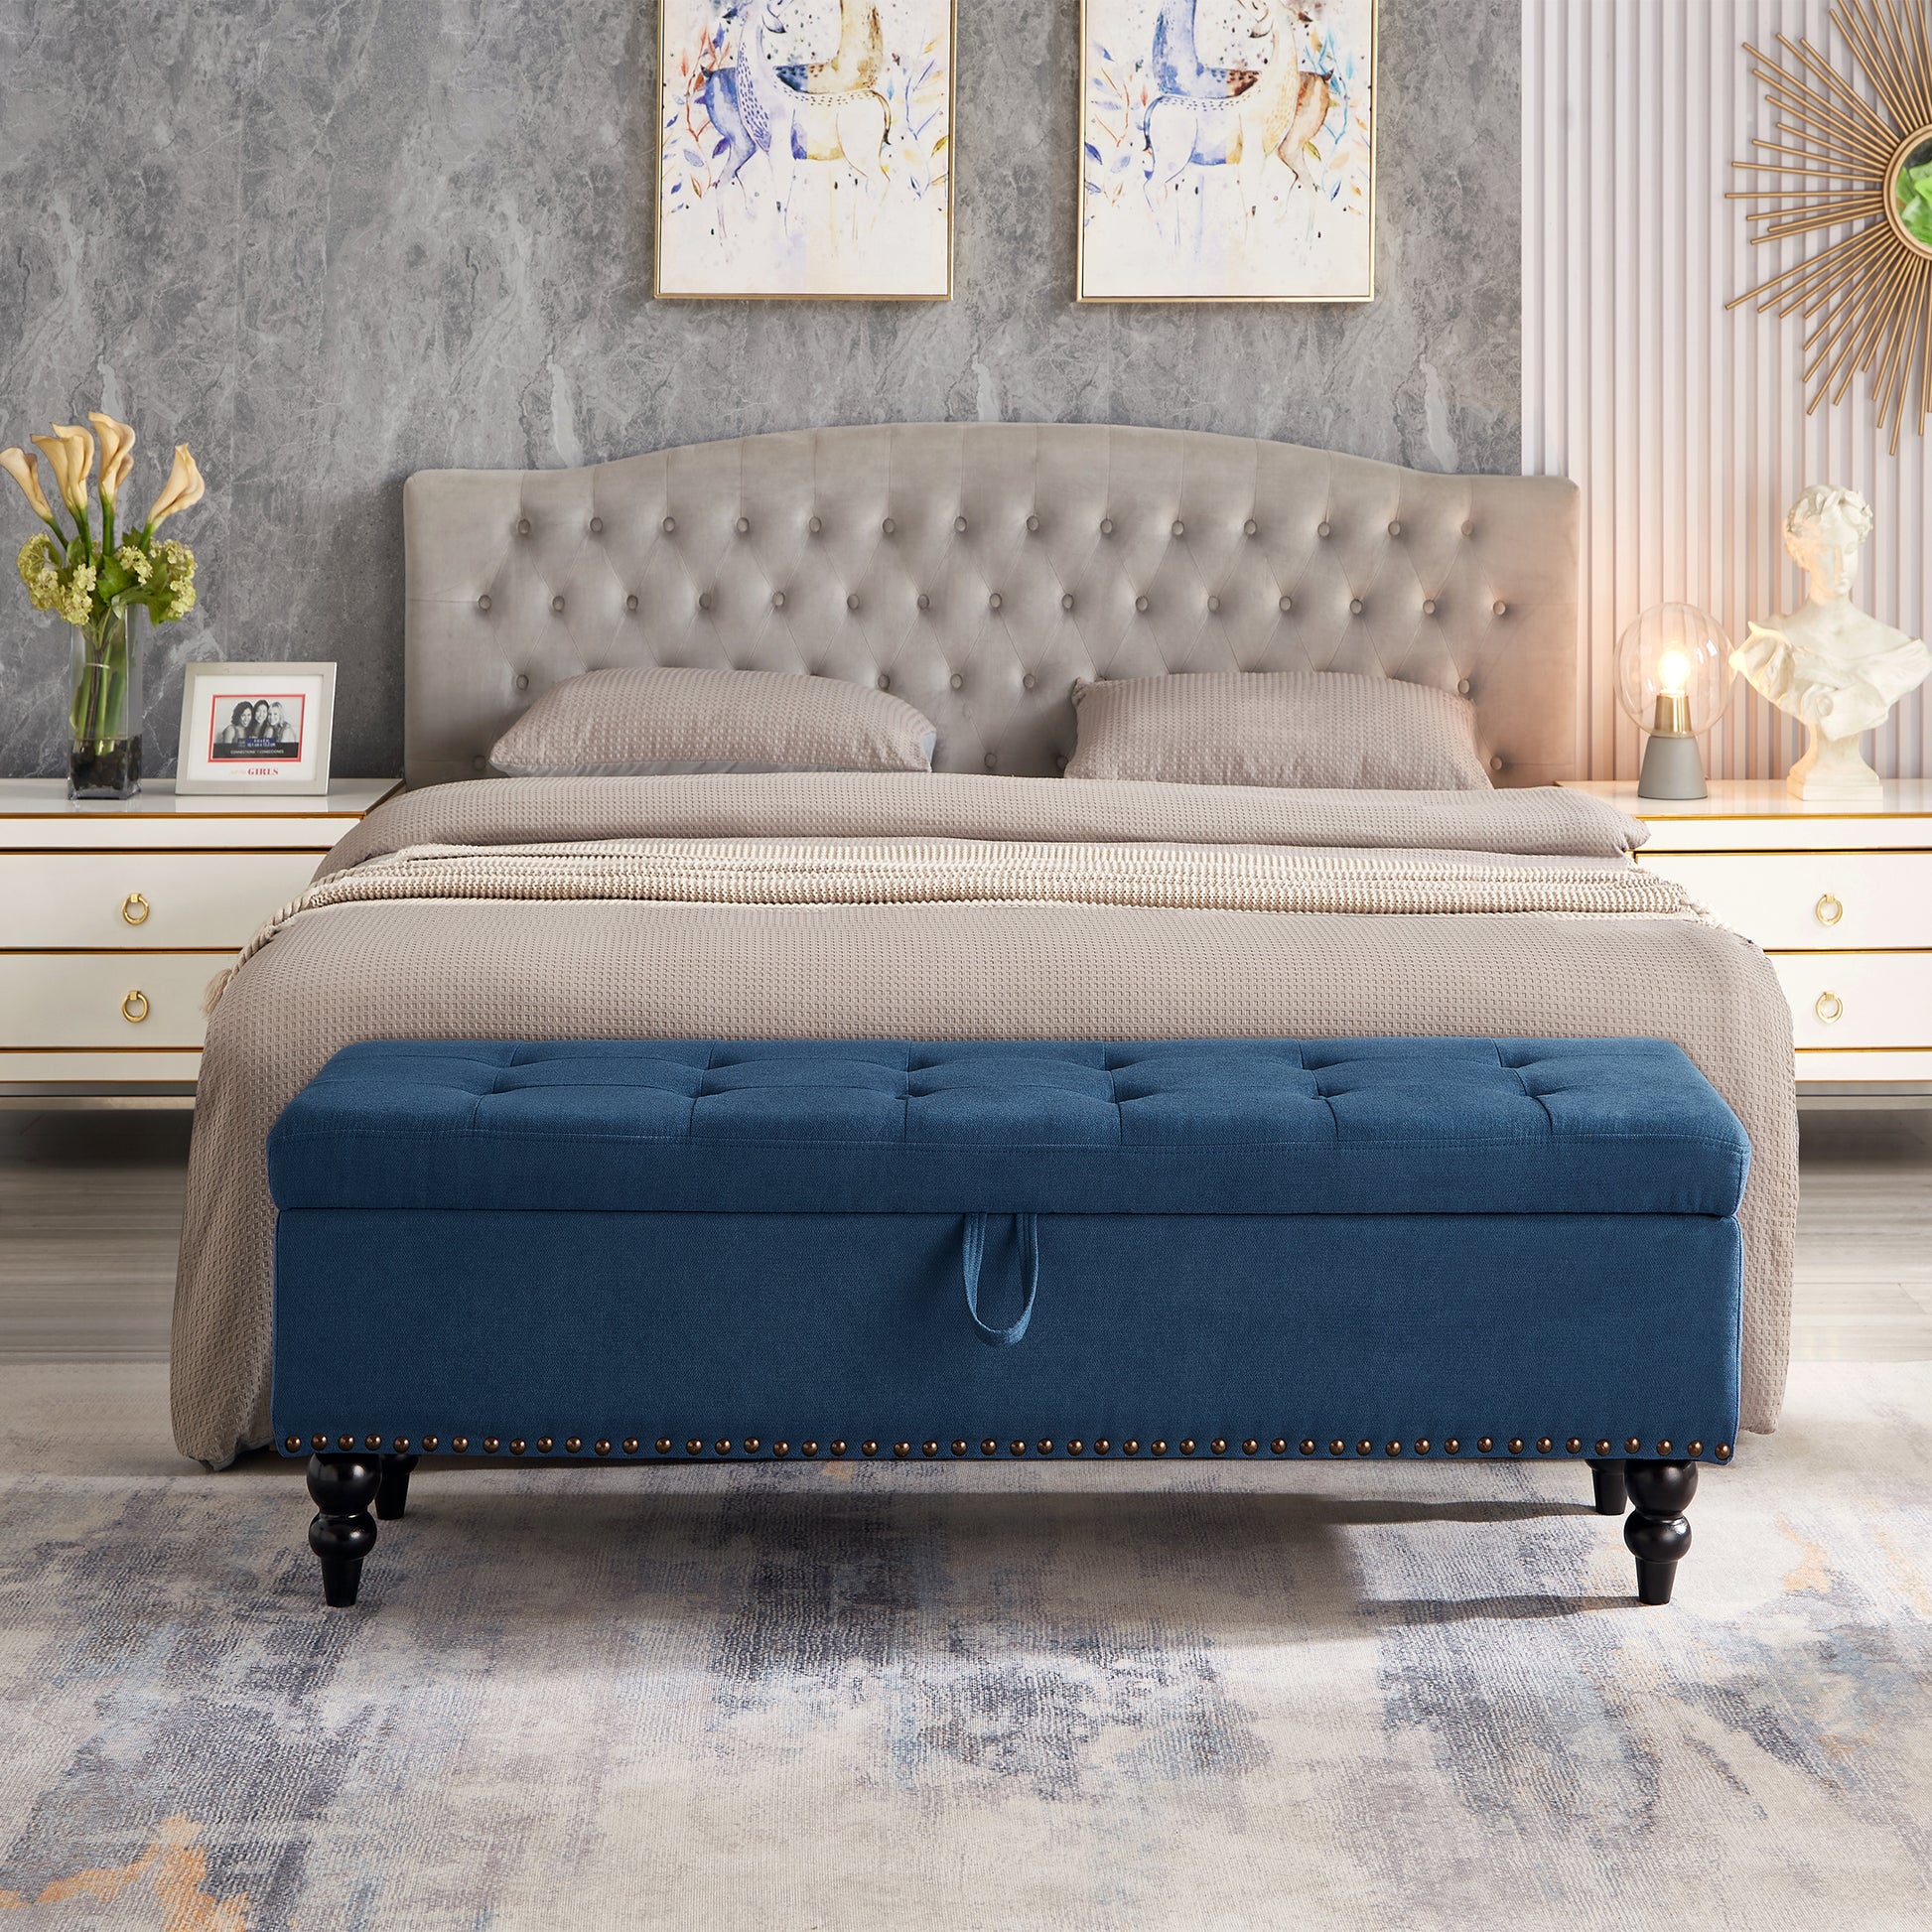 59" Bed Bench with Storage Blue Fabric blue-foam-cotton linen